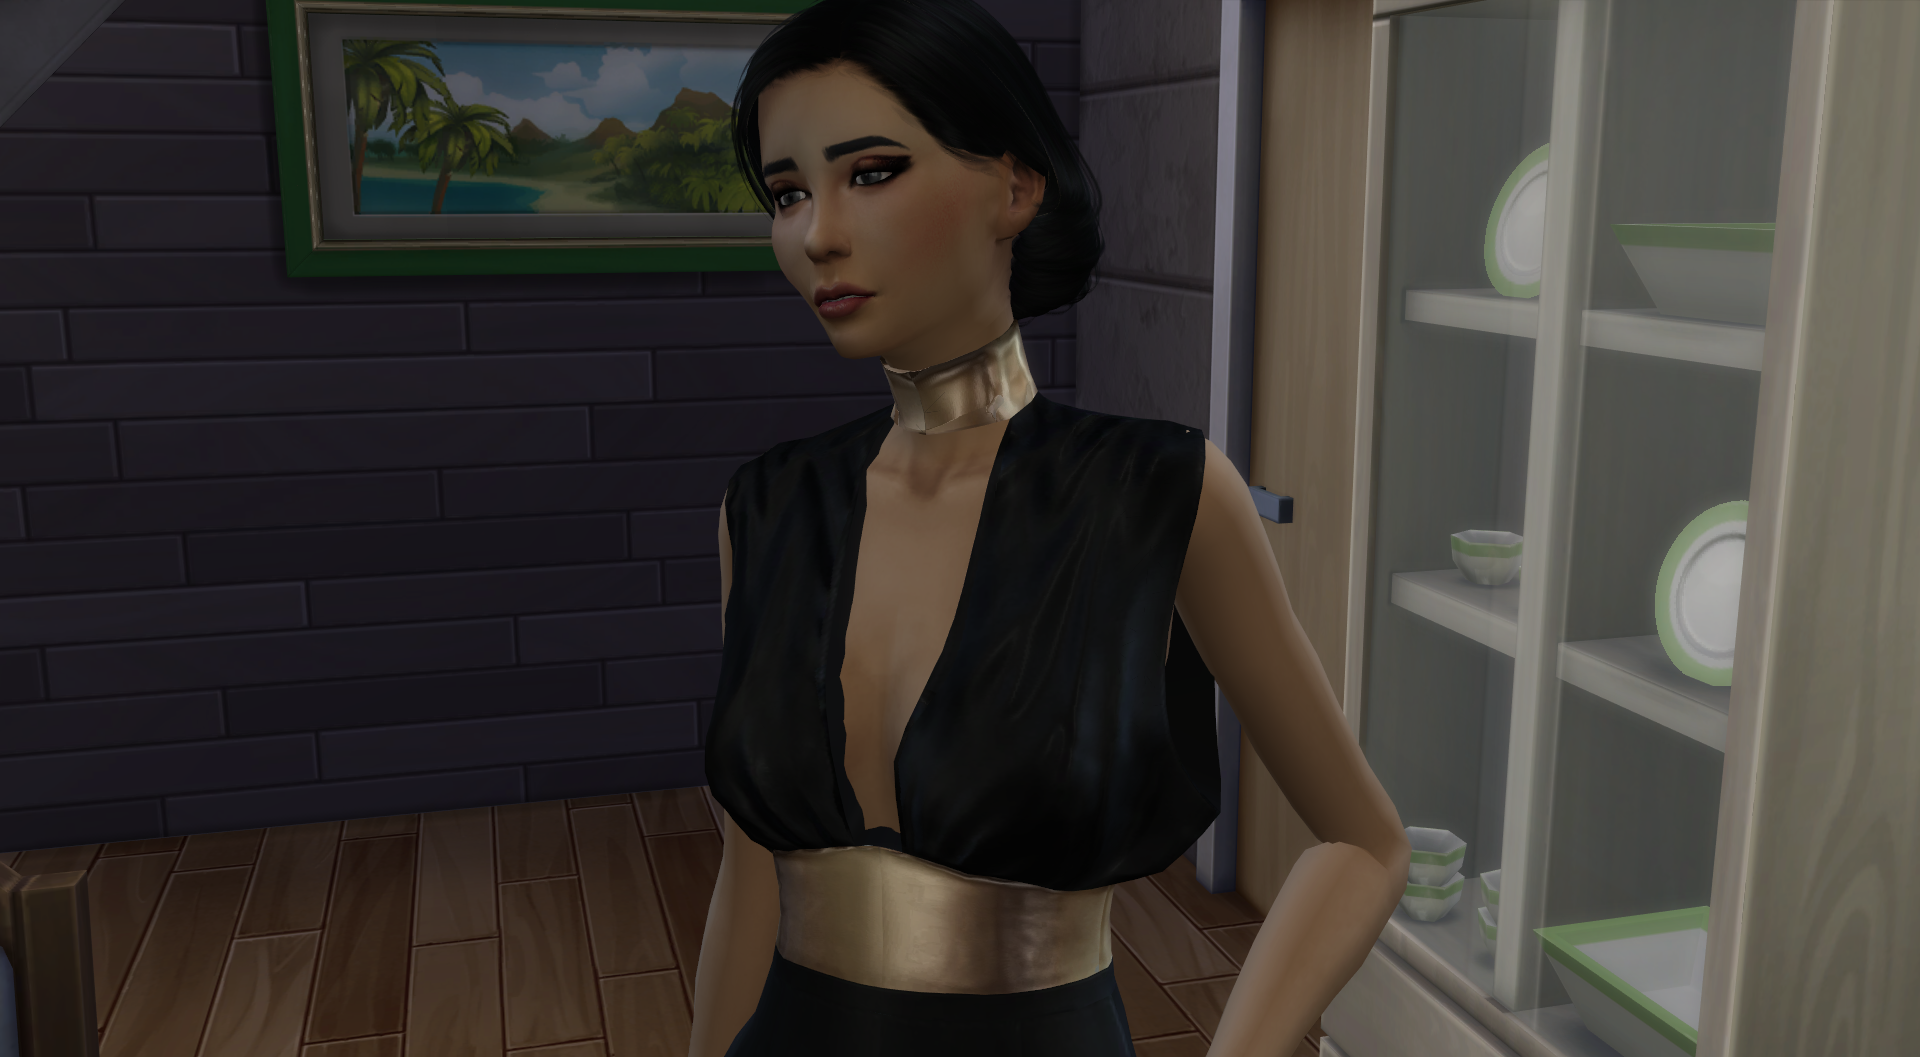 Share Your Female Sims Page 153 The Sims 4 General